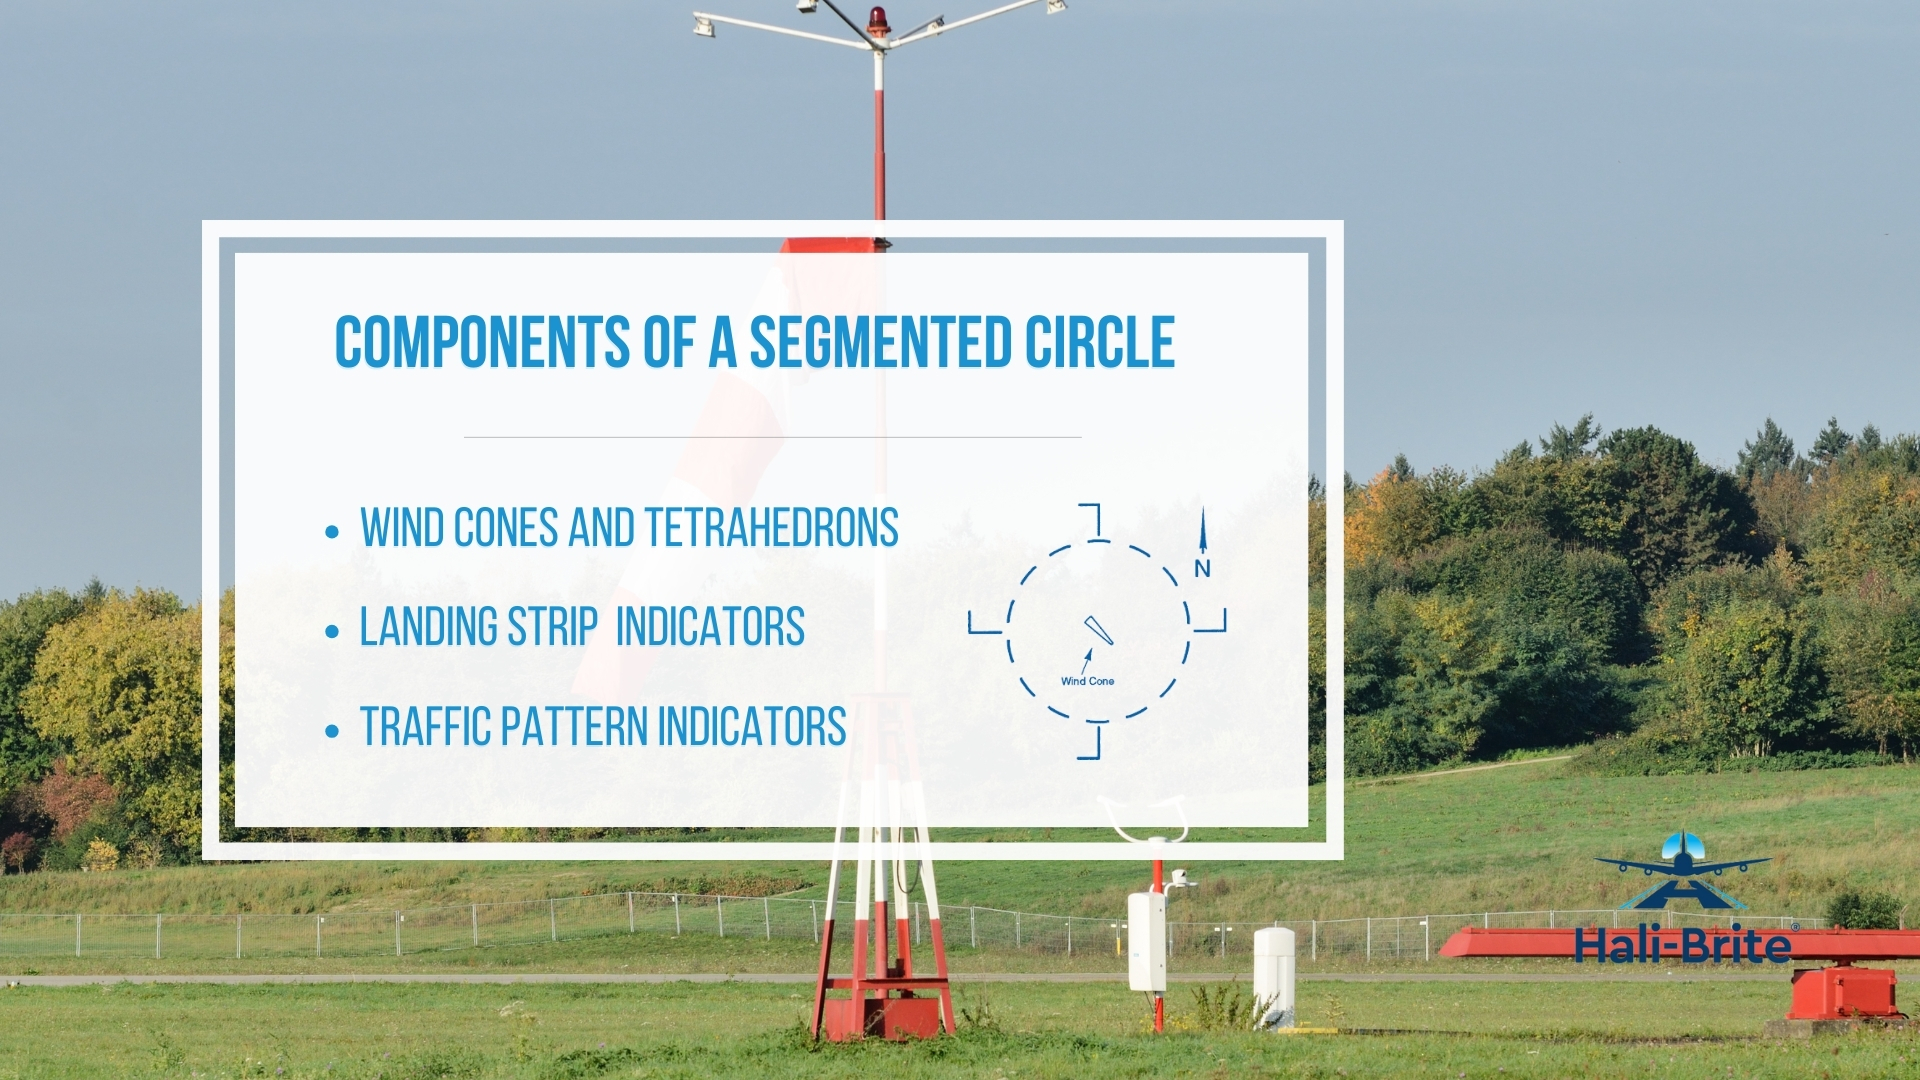 Infographic image of components of a segmented circle